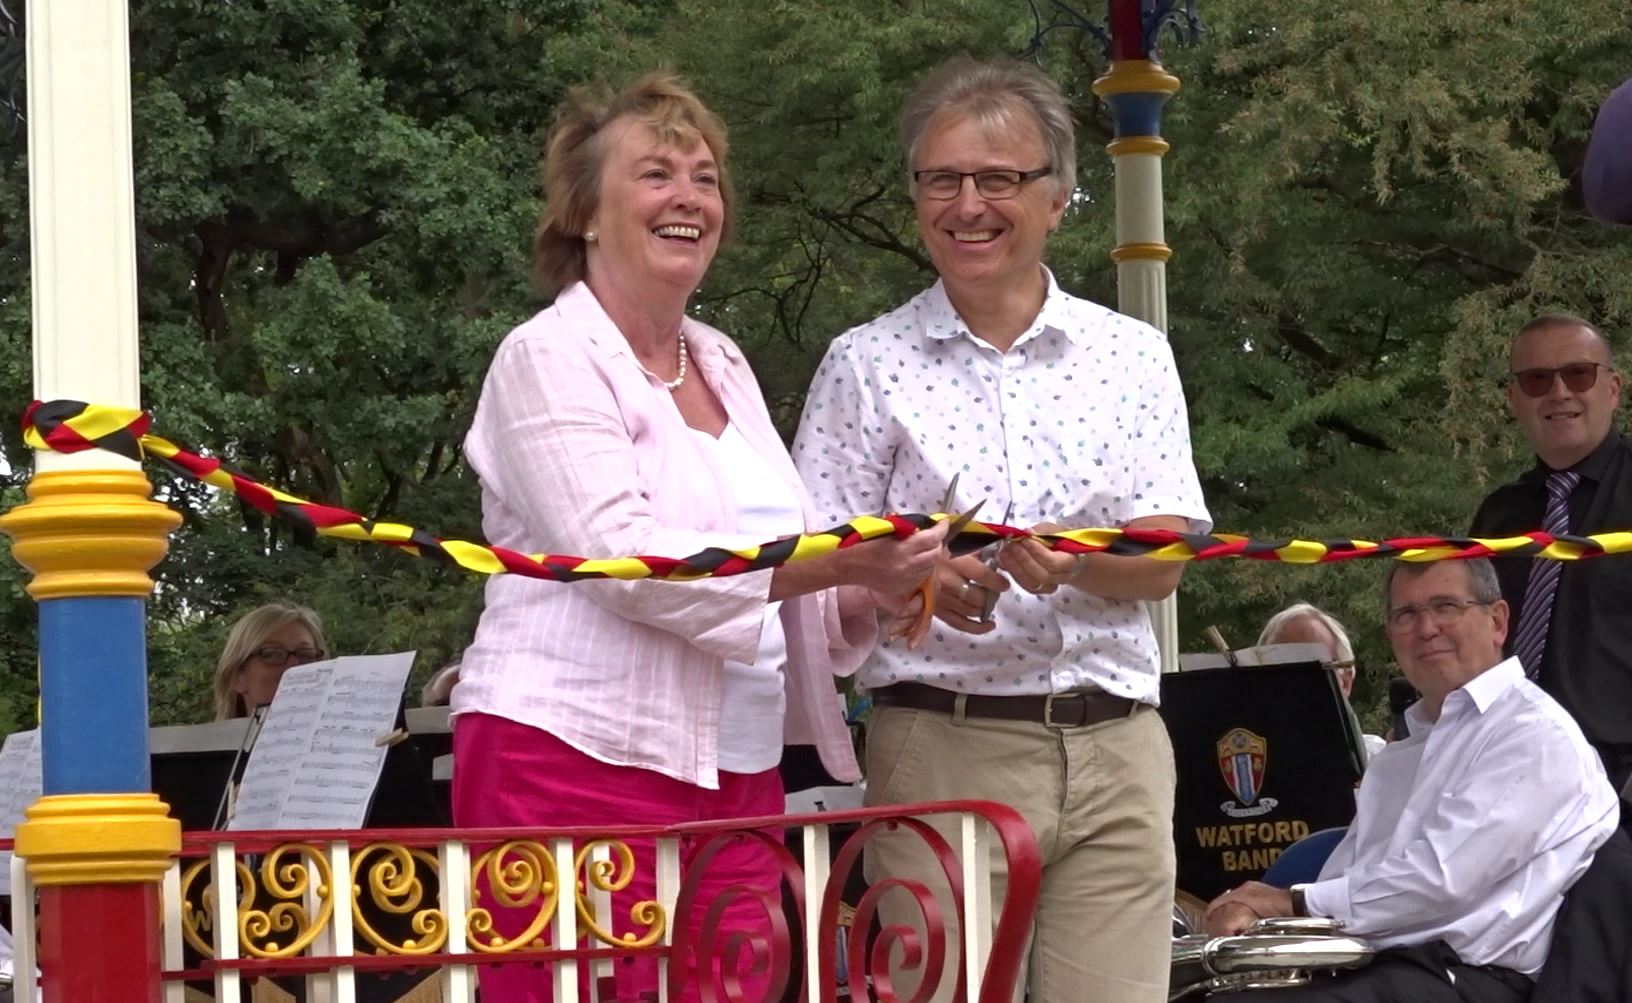 VIDEO: Watford Bandstand Officially Opened by Baroness Mayor Dorothy went into Full Swing